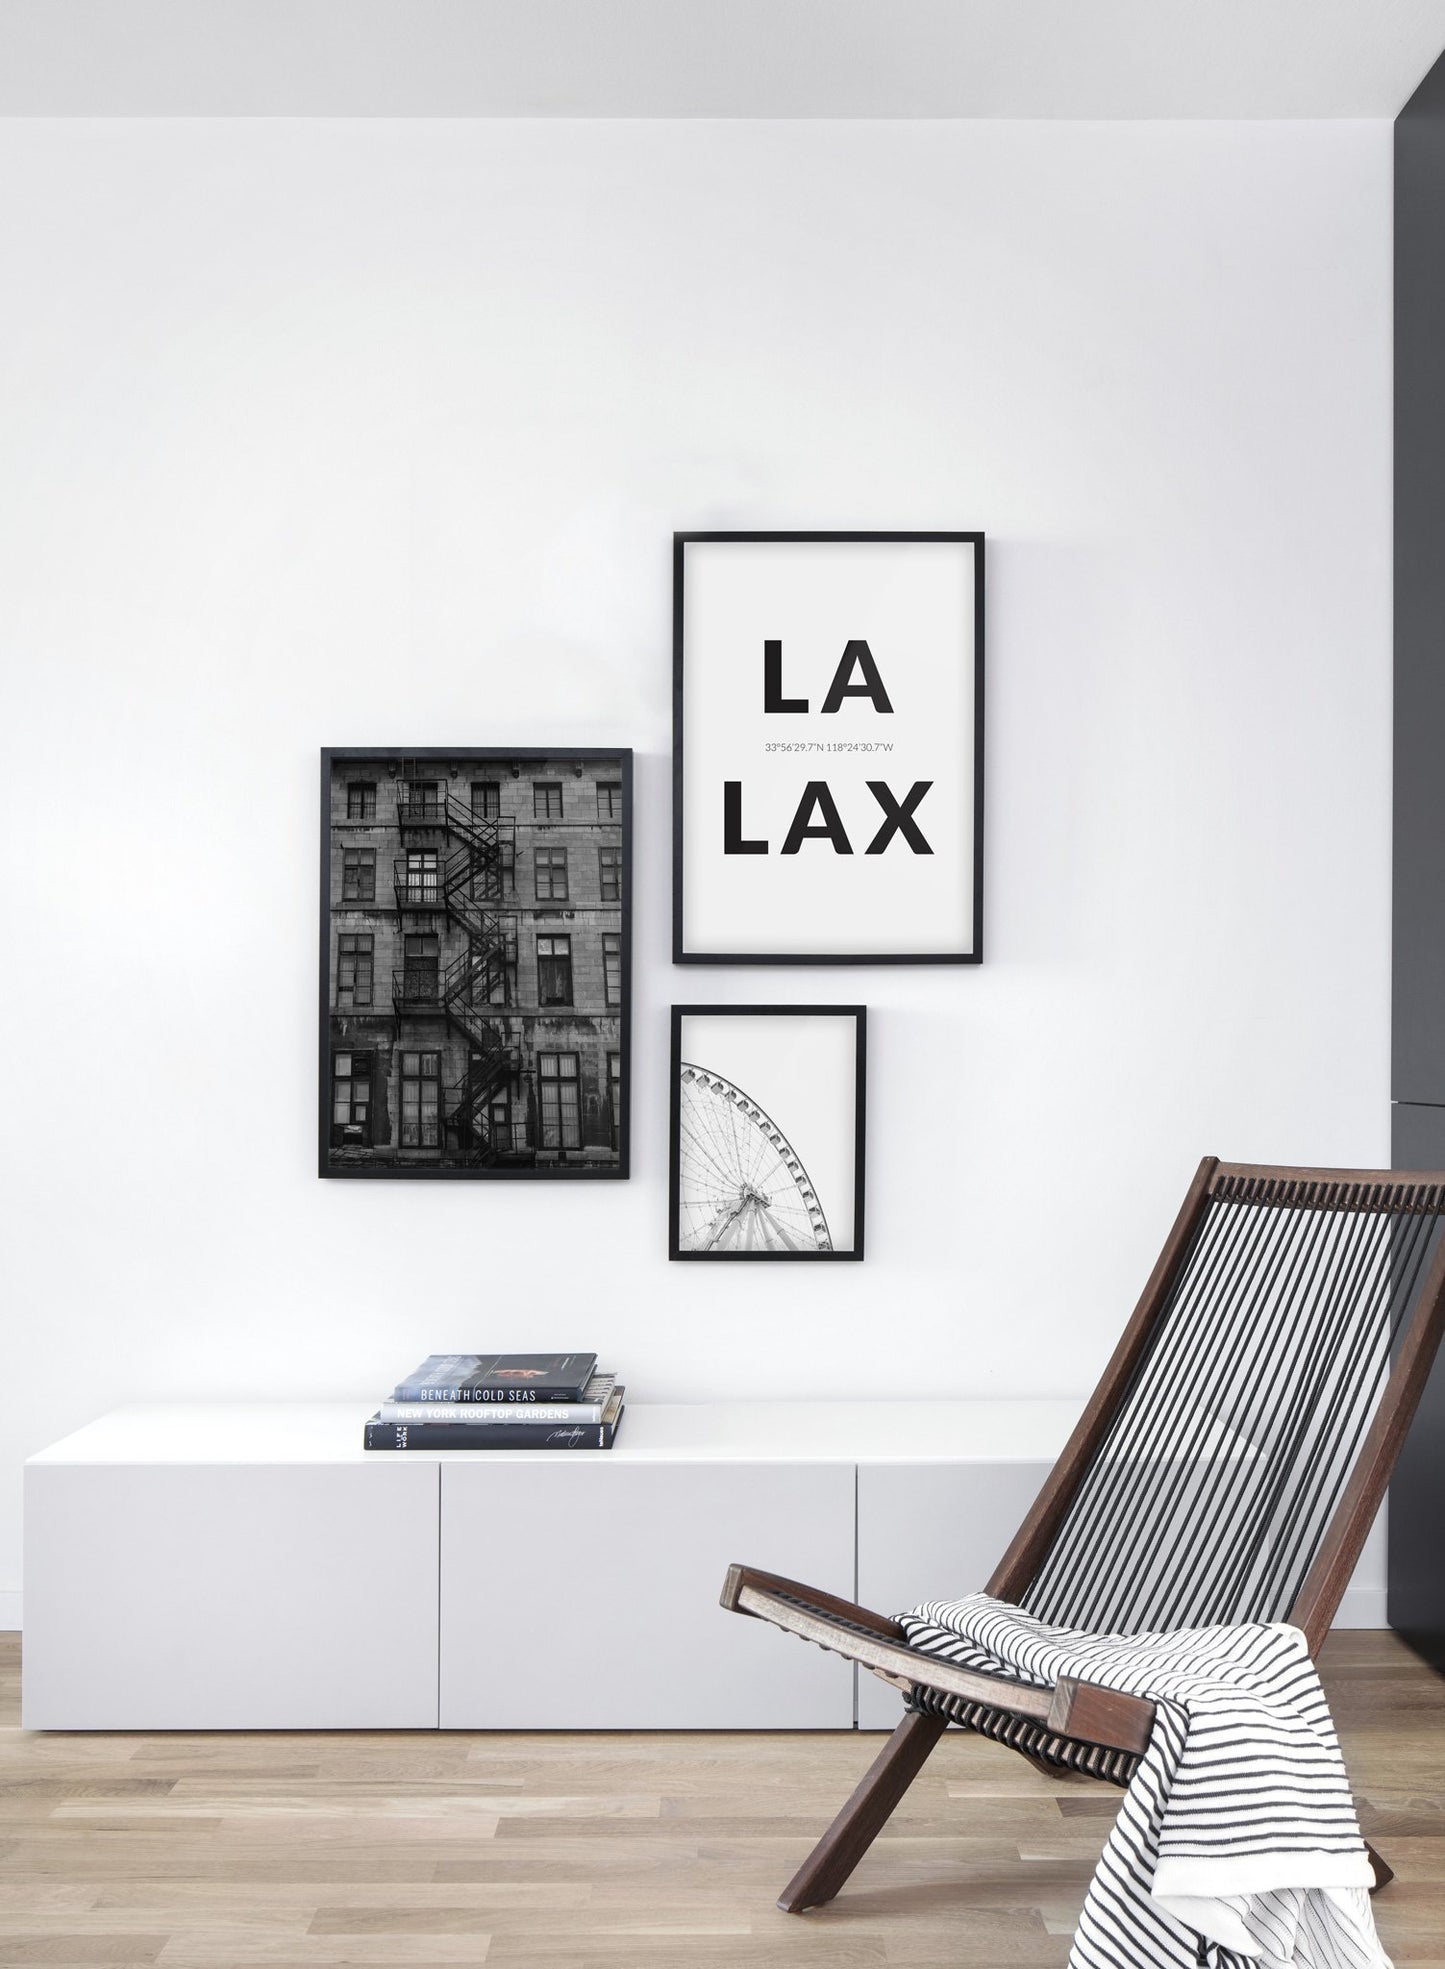 Destination: L.A. modern minimalist photography poster by Opposite Wall - Living room